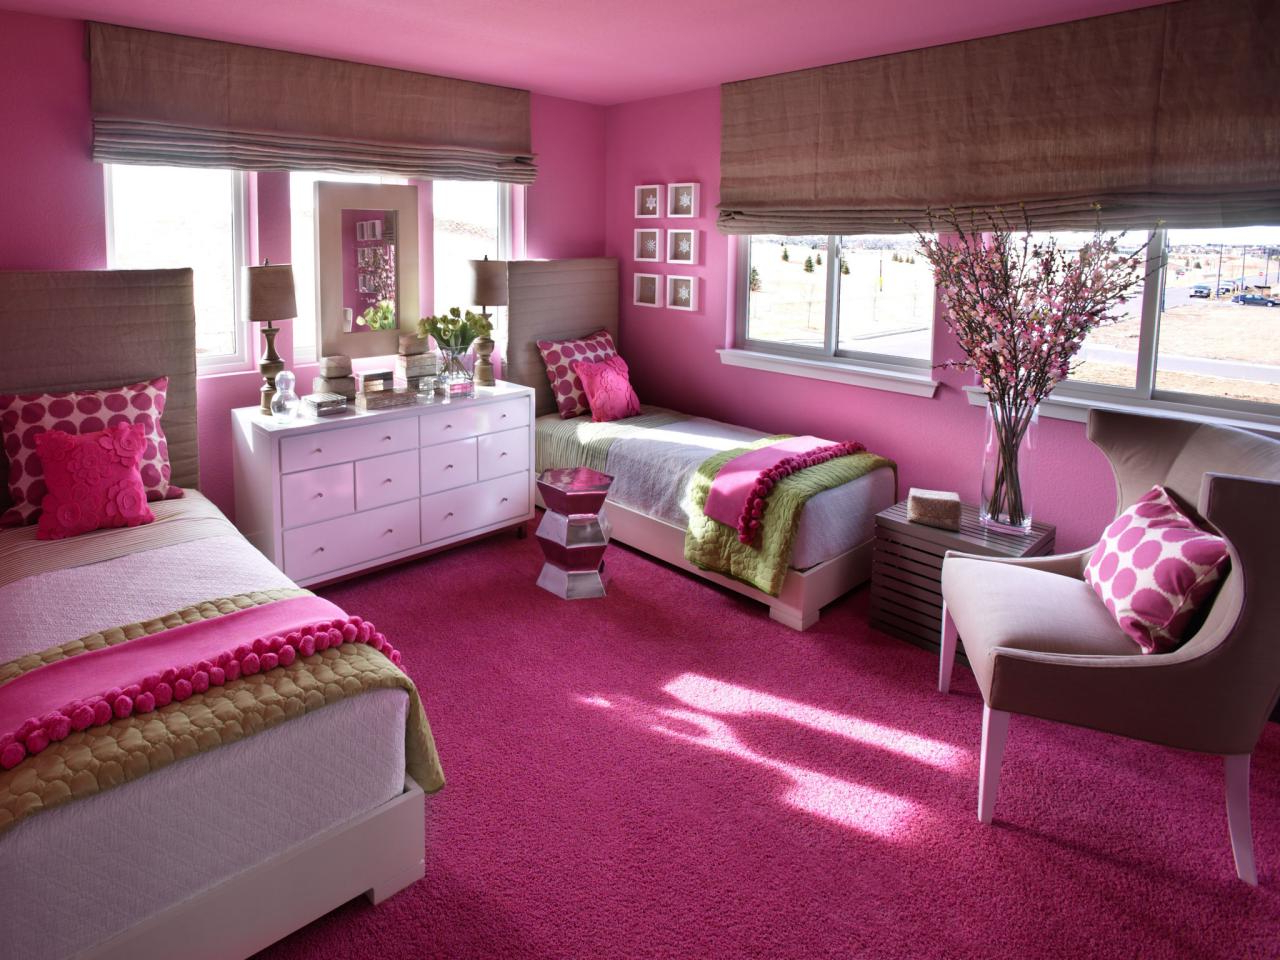 Teenage Bedroom Color Schemes Pictures Options Ideas